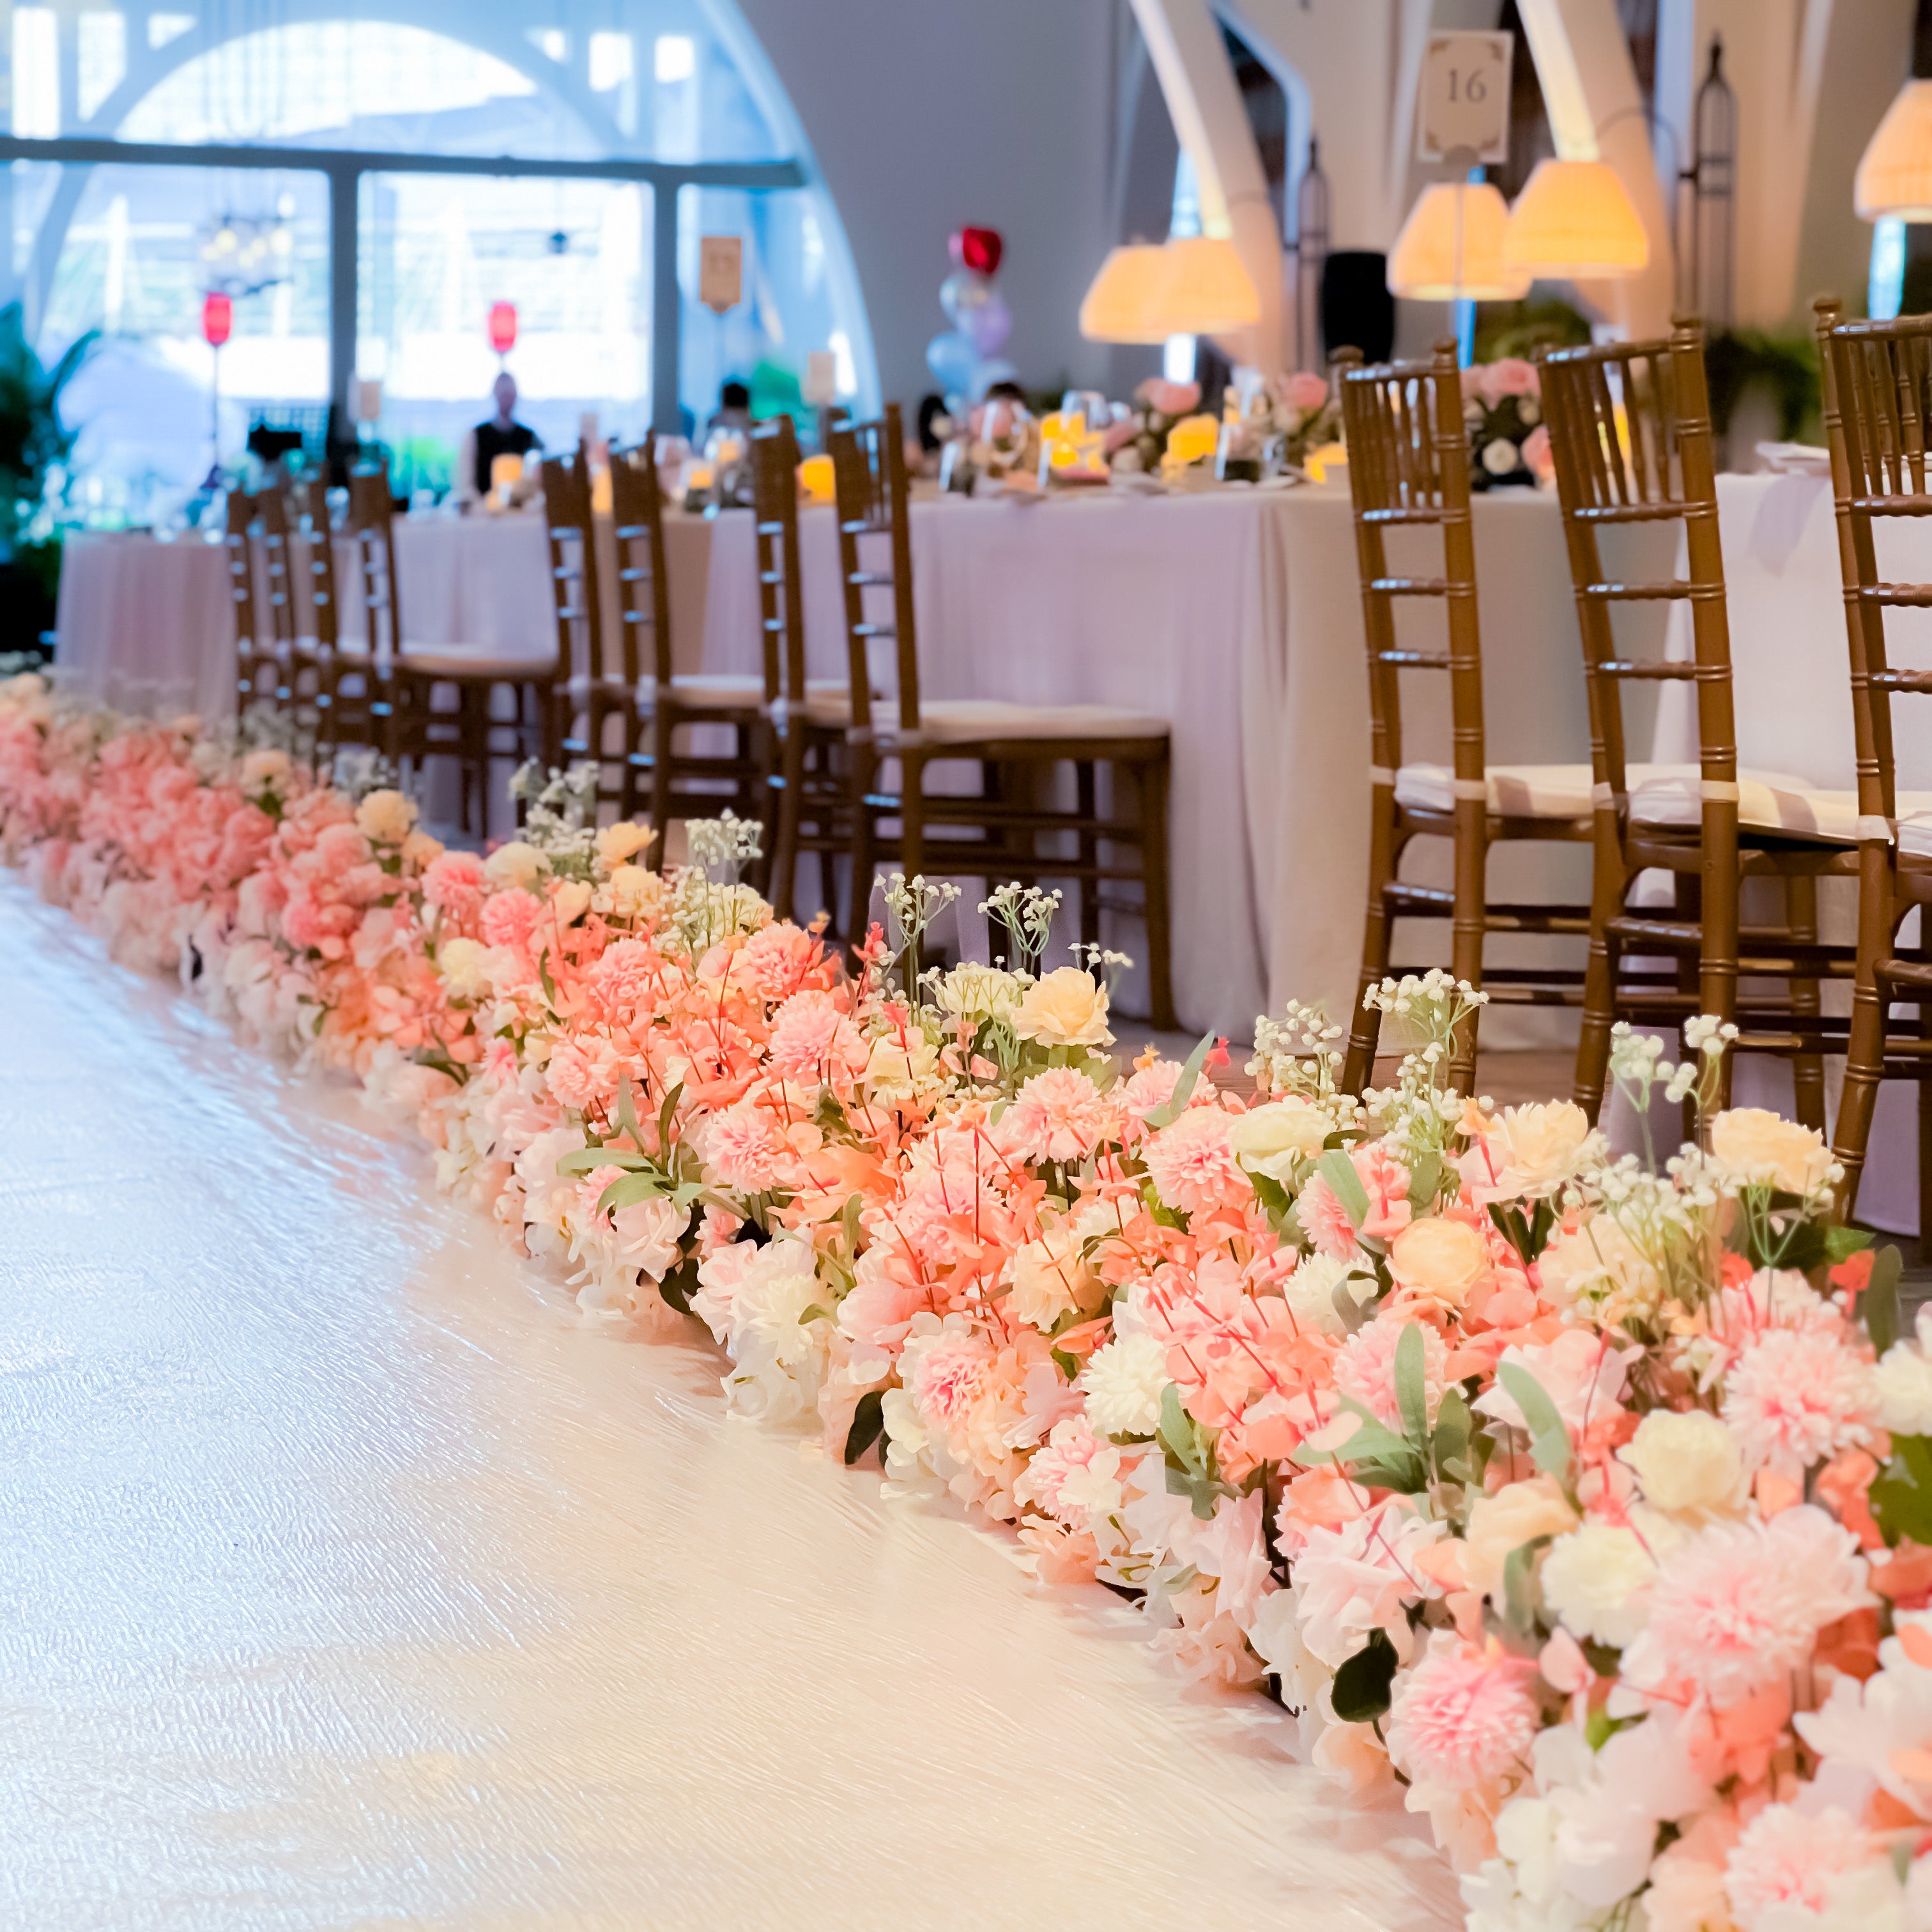 Wedding Ballroom Decor in Singapore - Pink White Peach Floral Aisle Enhancement with White Runner (Venue: The Fullerton Bay Hotel Clifford Pier)